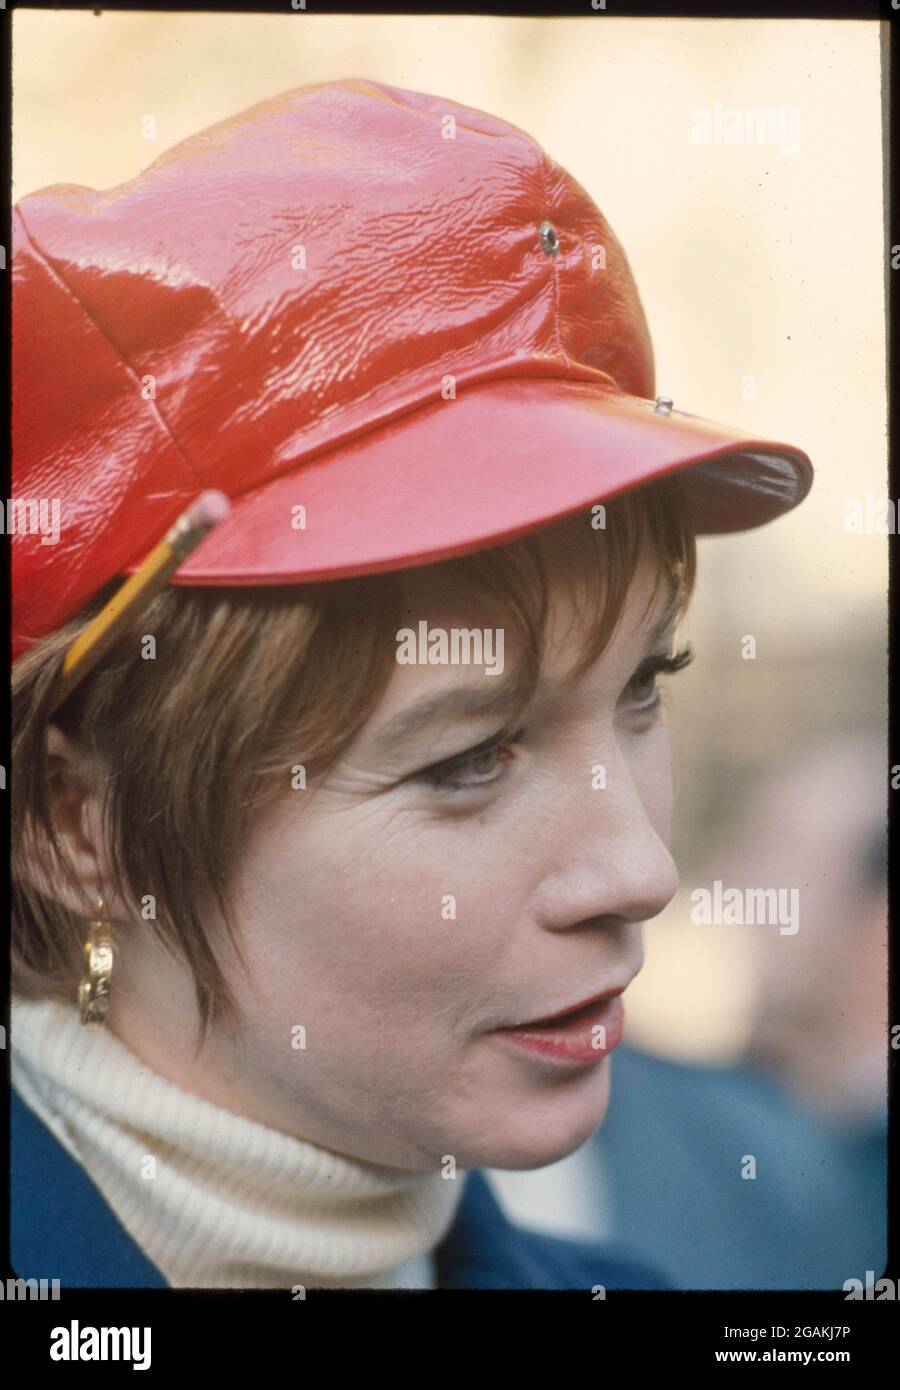 Actress Shirley MacLaine participates in the massive Vietnam Moratorium, a demonstration to end the war in Vietnam, New York, NY, 10/15/1969. (Photo by Bernard Gotfryd/LOC/RBM Vintage Images) Stock Photo